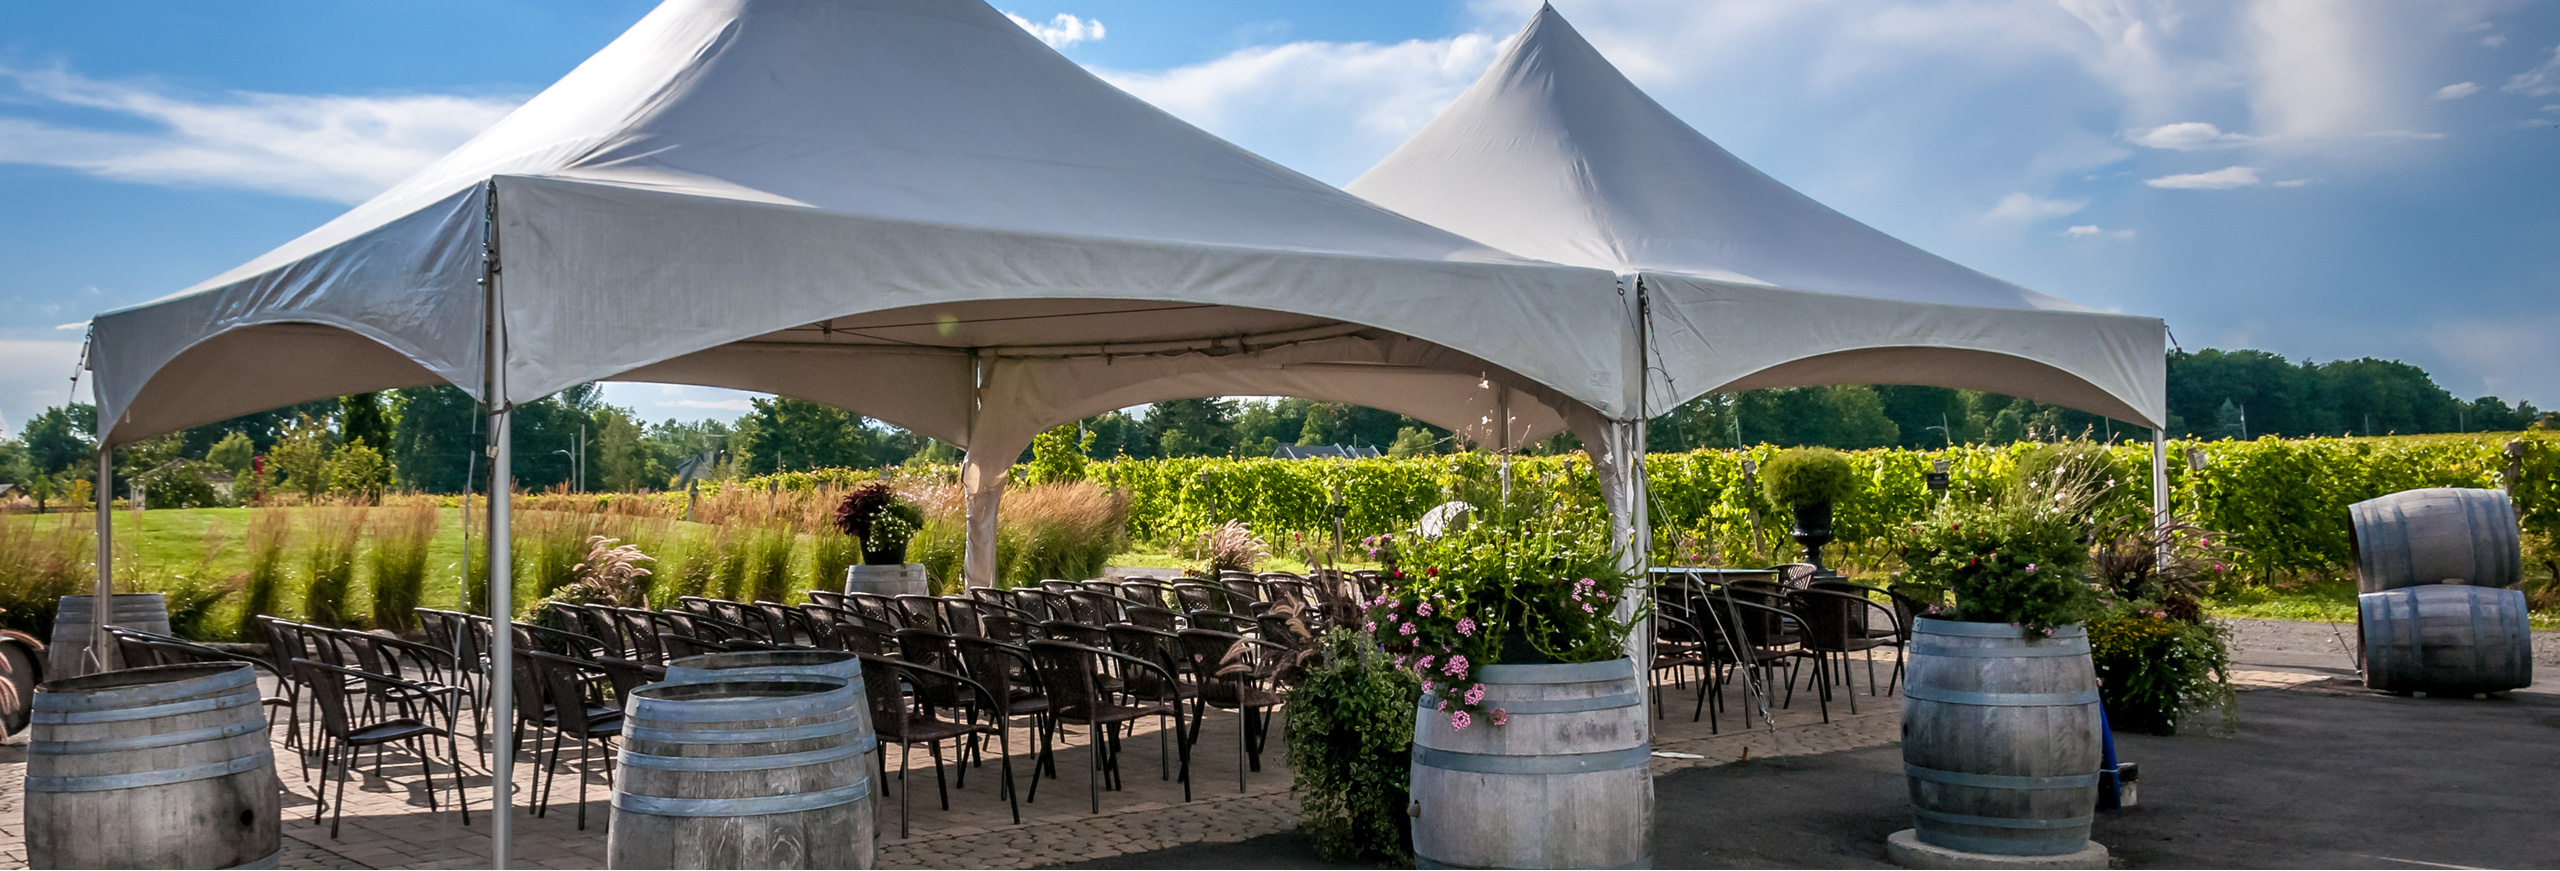 wedding table and chair rental for Dubuque